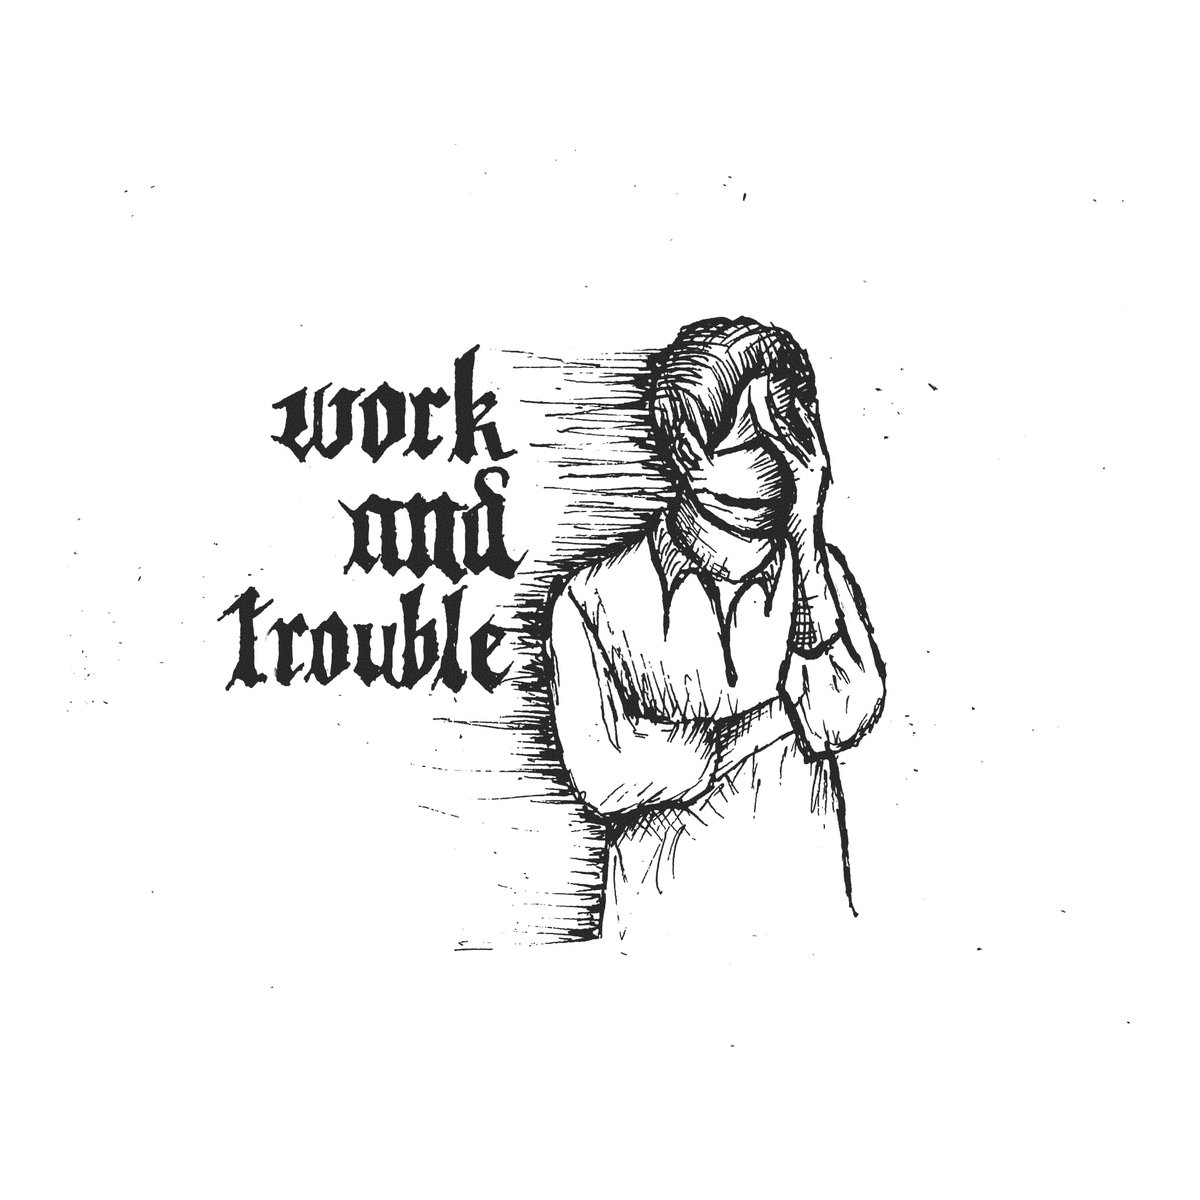 #wednesday thoughts Illustrated 
🖋️ Check out my latest ink illustration! 💼 Capturing the spirit of 'work and trouble' with a touch of gothic lettering and a troubled expression. 🌍 Embrace the journey, highs, and lows! #InkArt #EmbraceTheJourney 🚀 Cuz #workandtravel